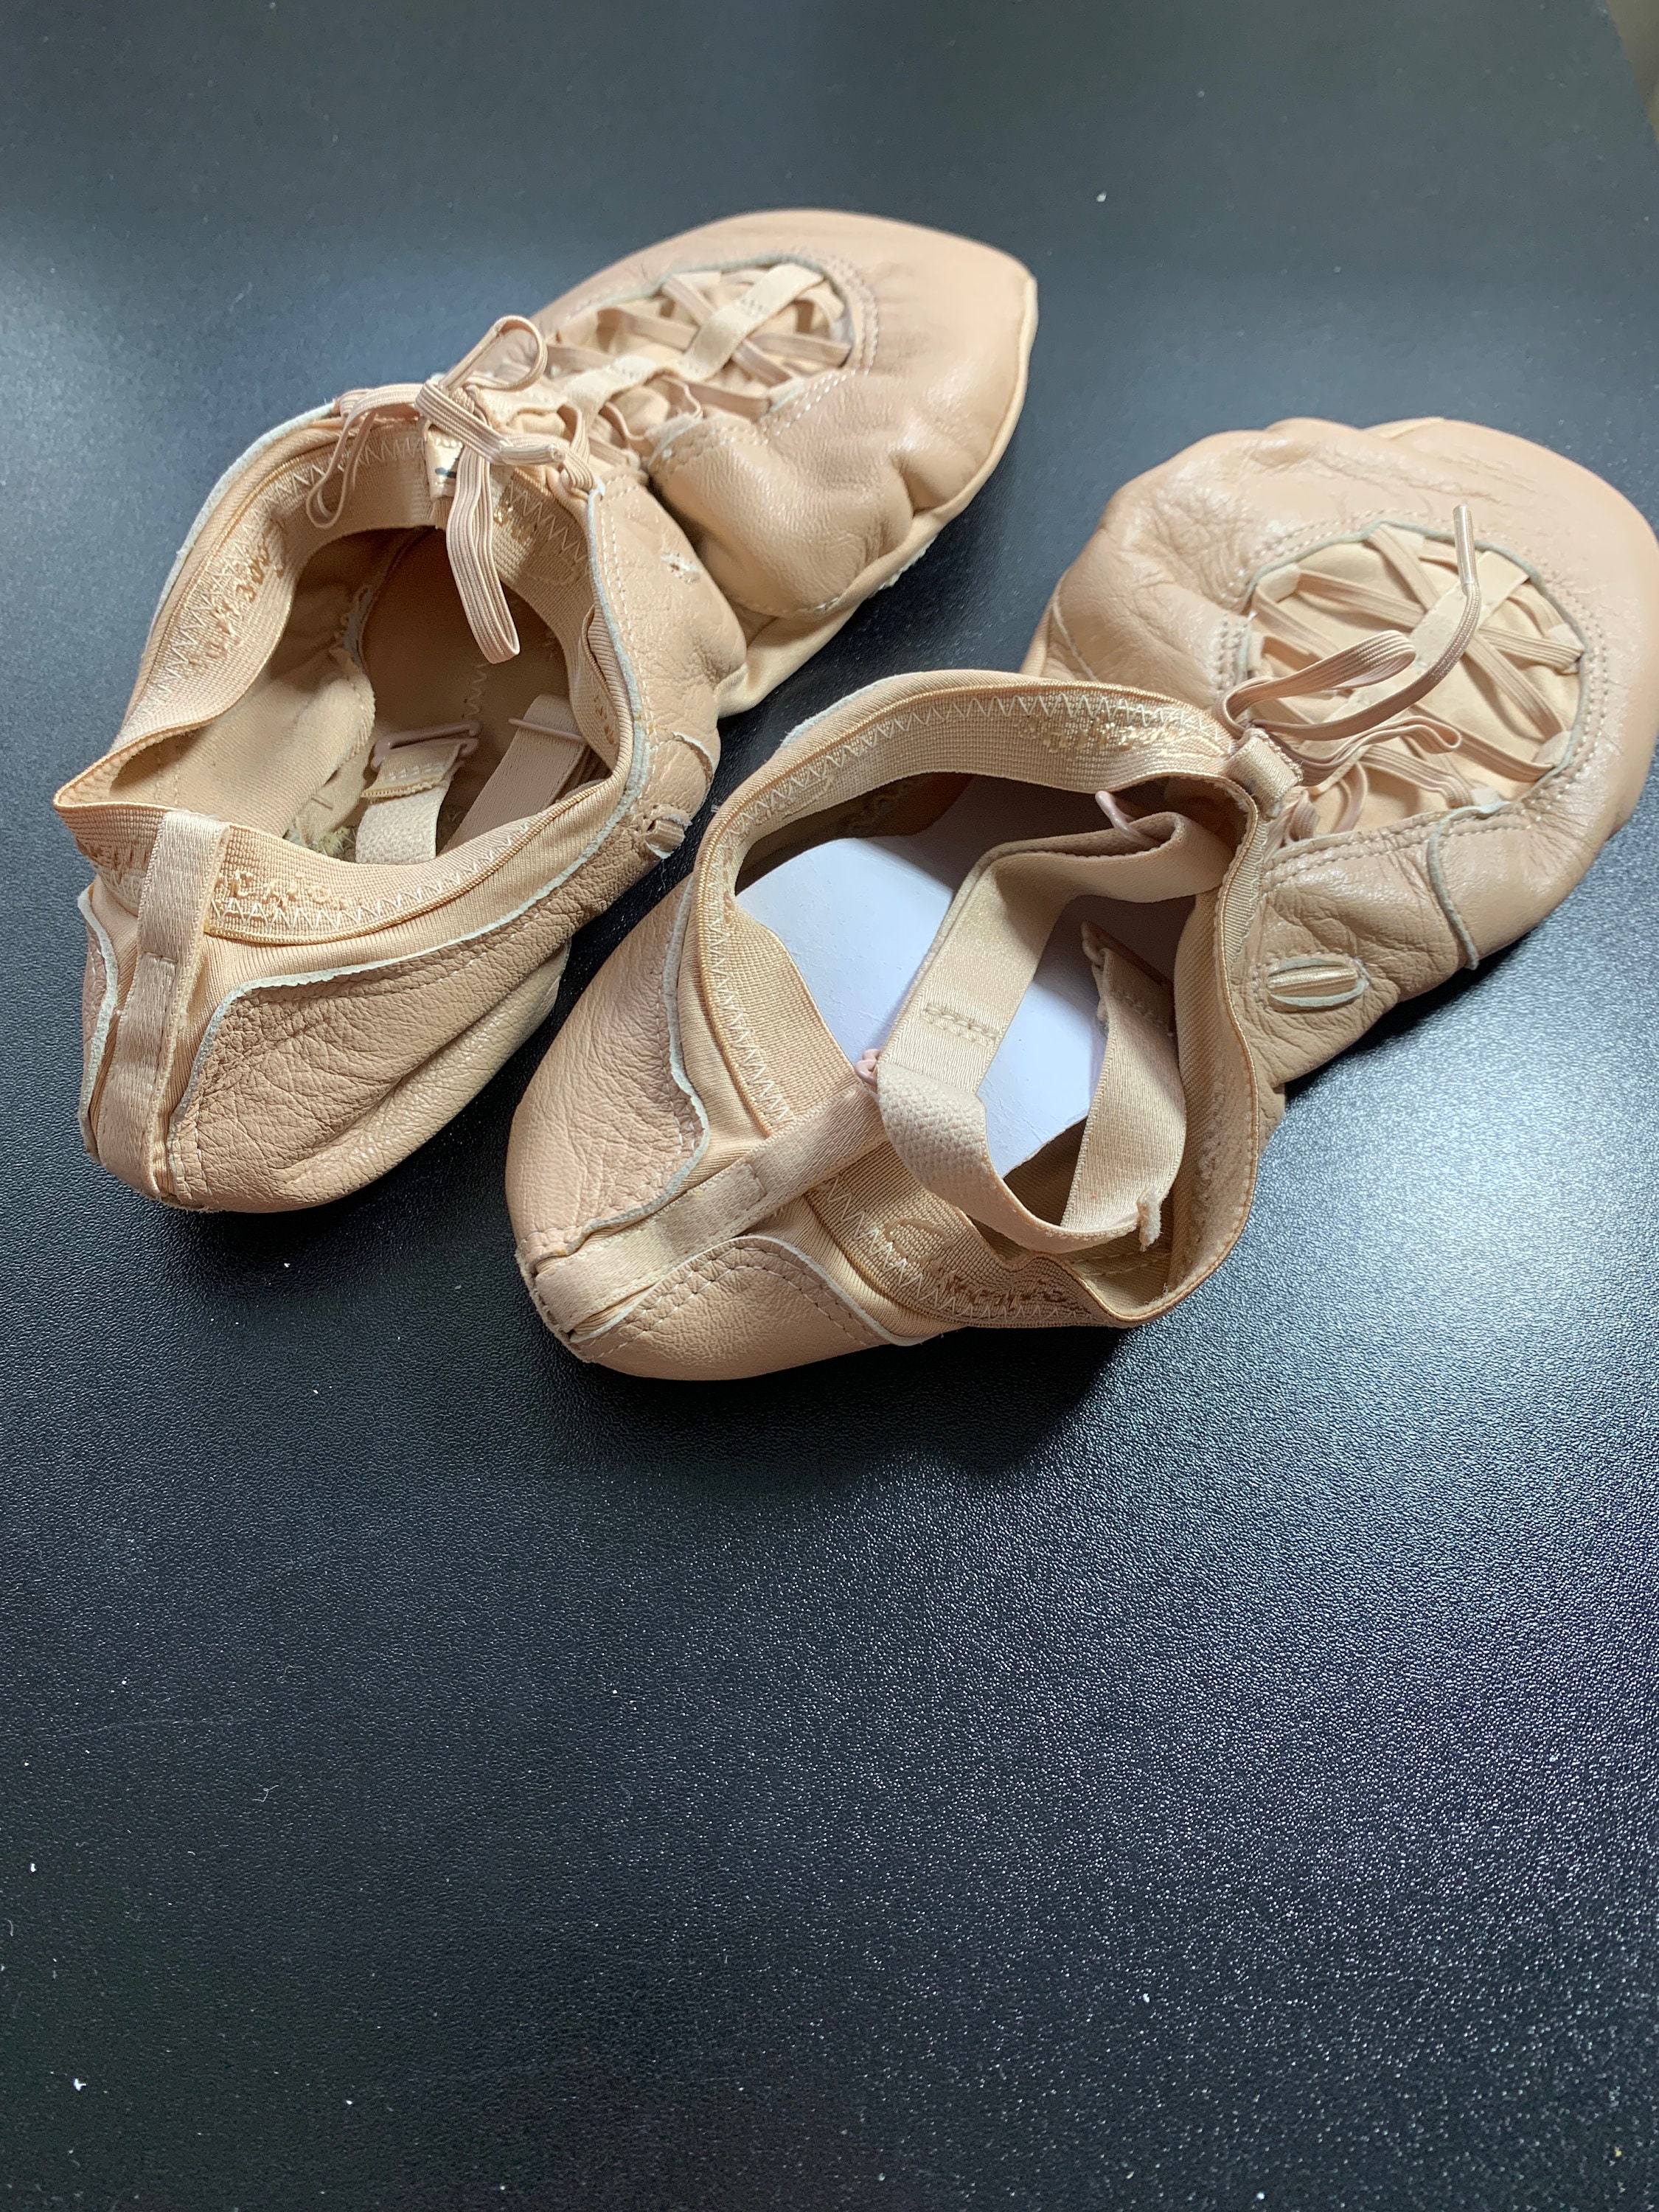 CAPEZIO Leather Ballet Shoes for man Full sole pink leather | Etsy